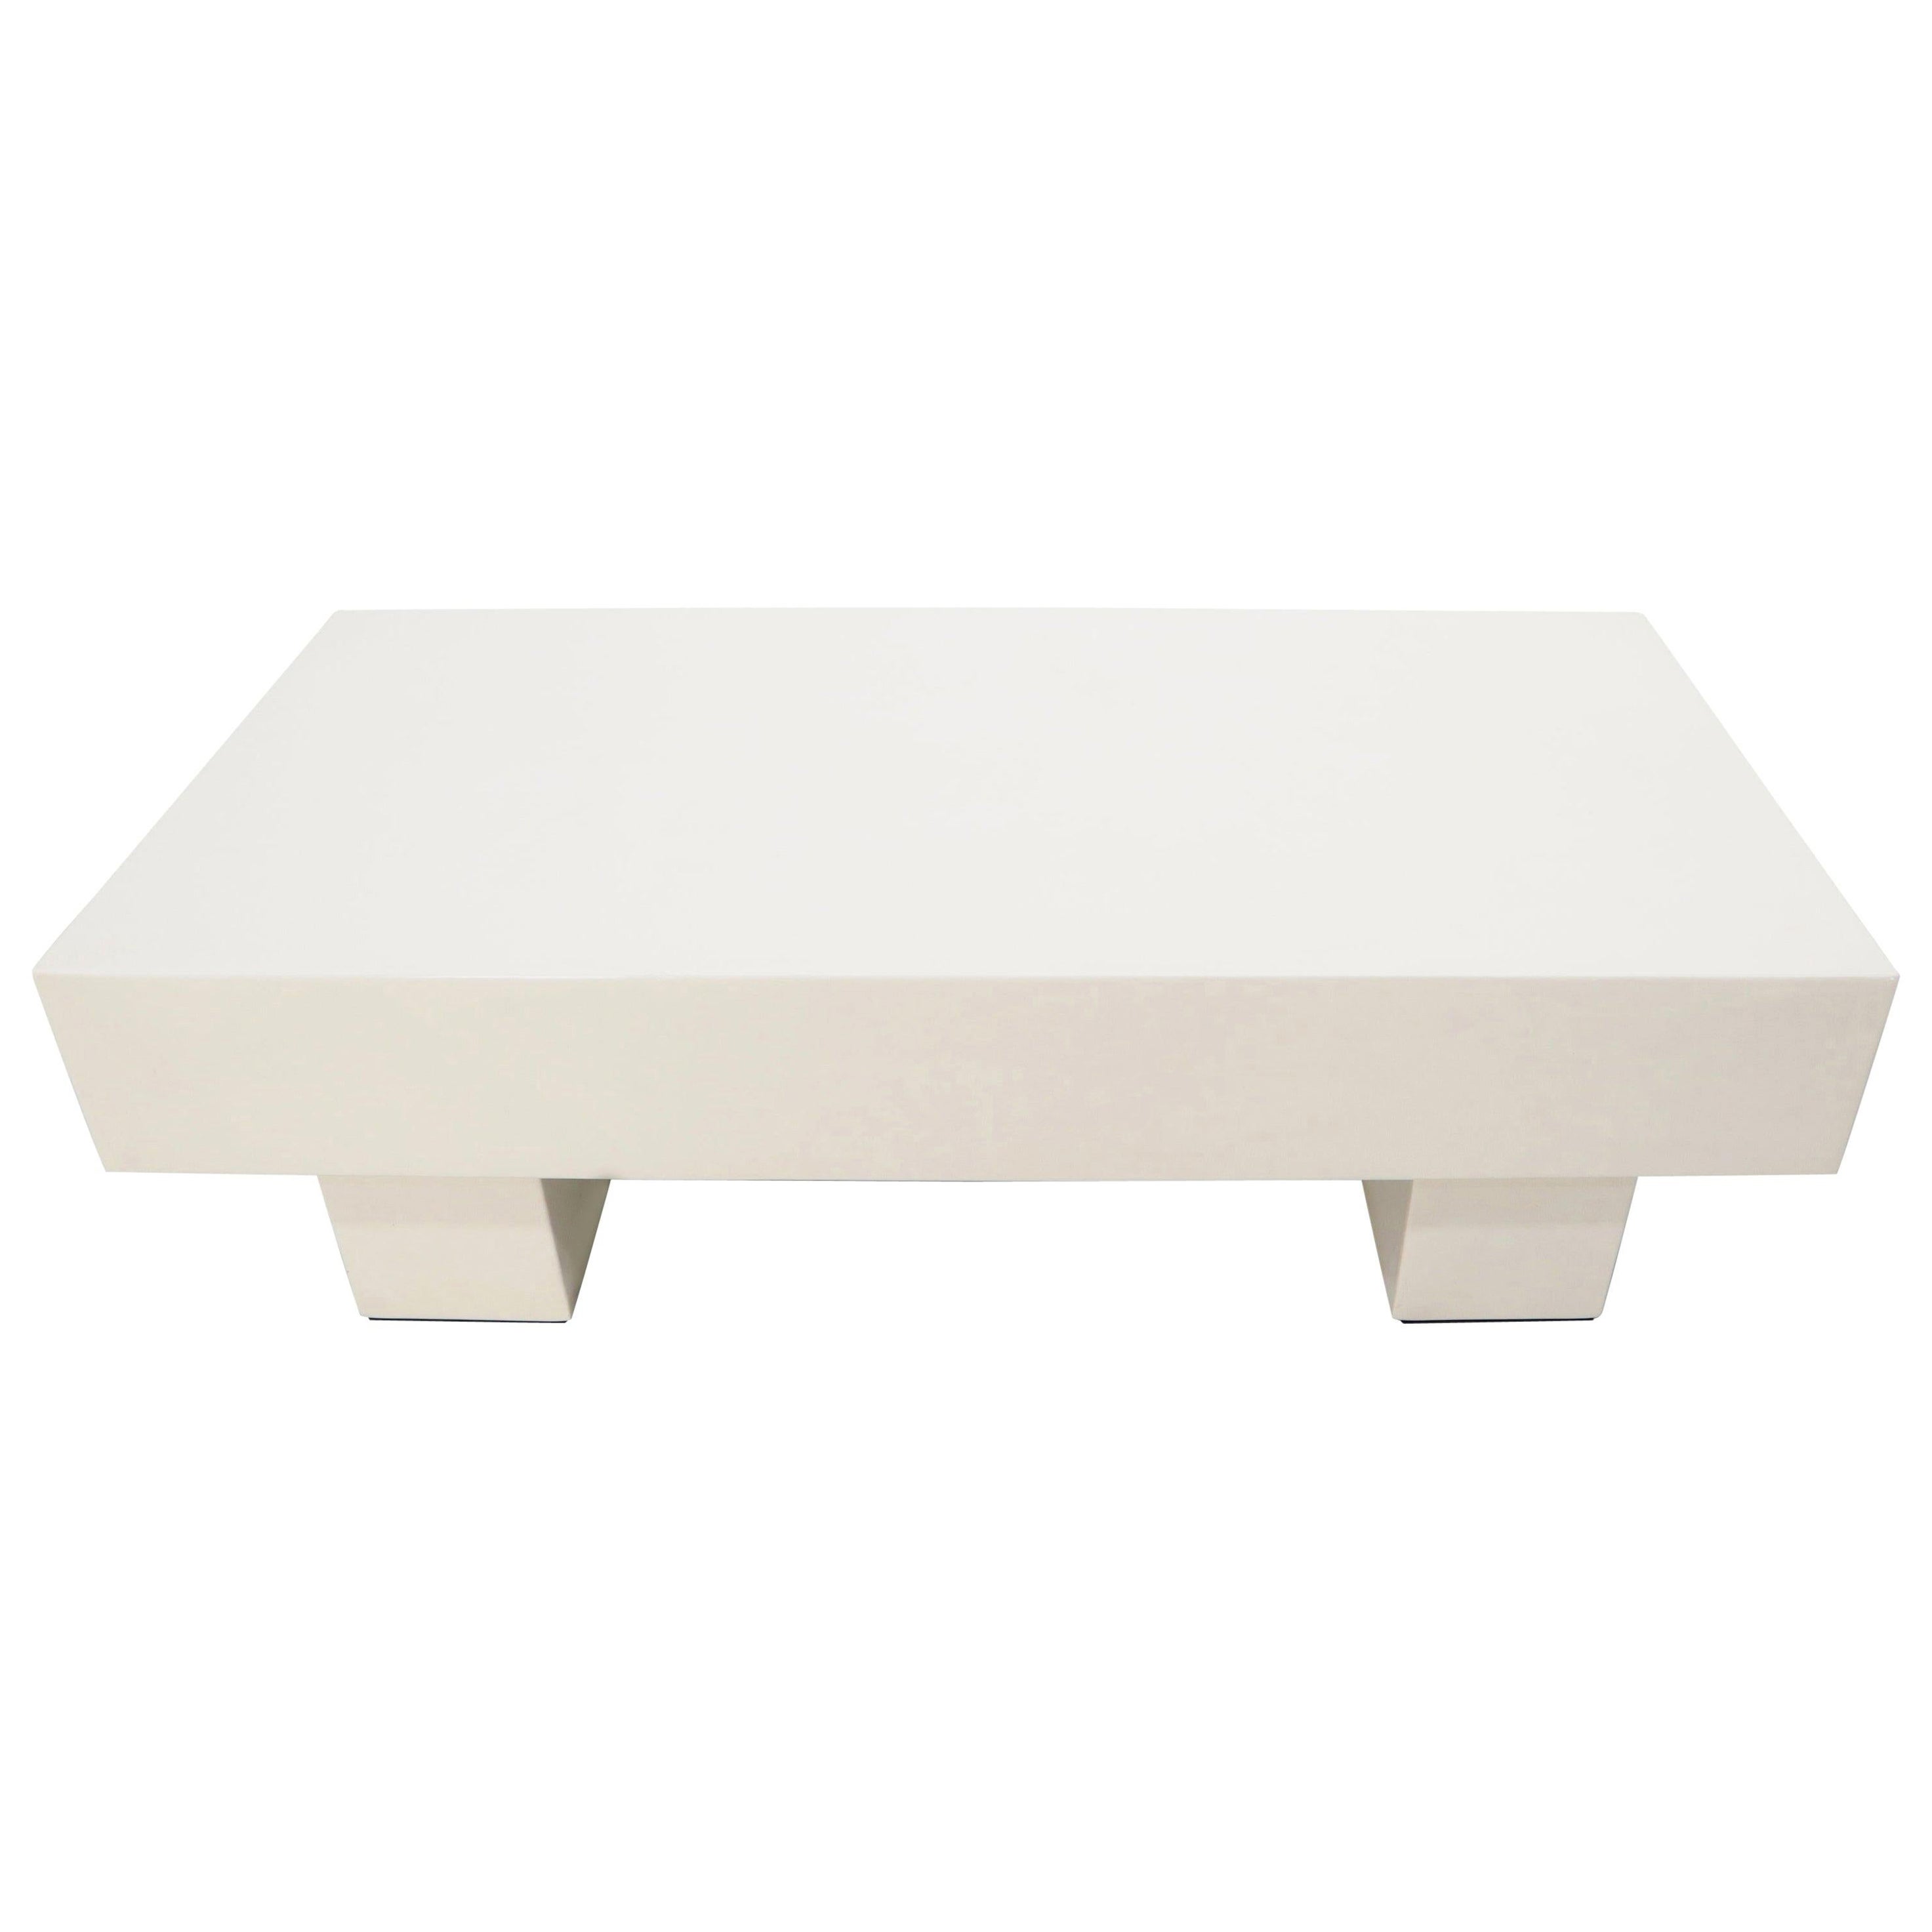 Mid Century Modern Double Pedestal Thick Cream Off-White Lacquer Coffee Table